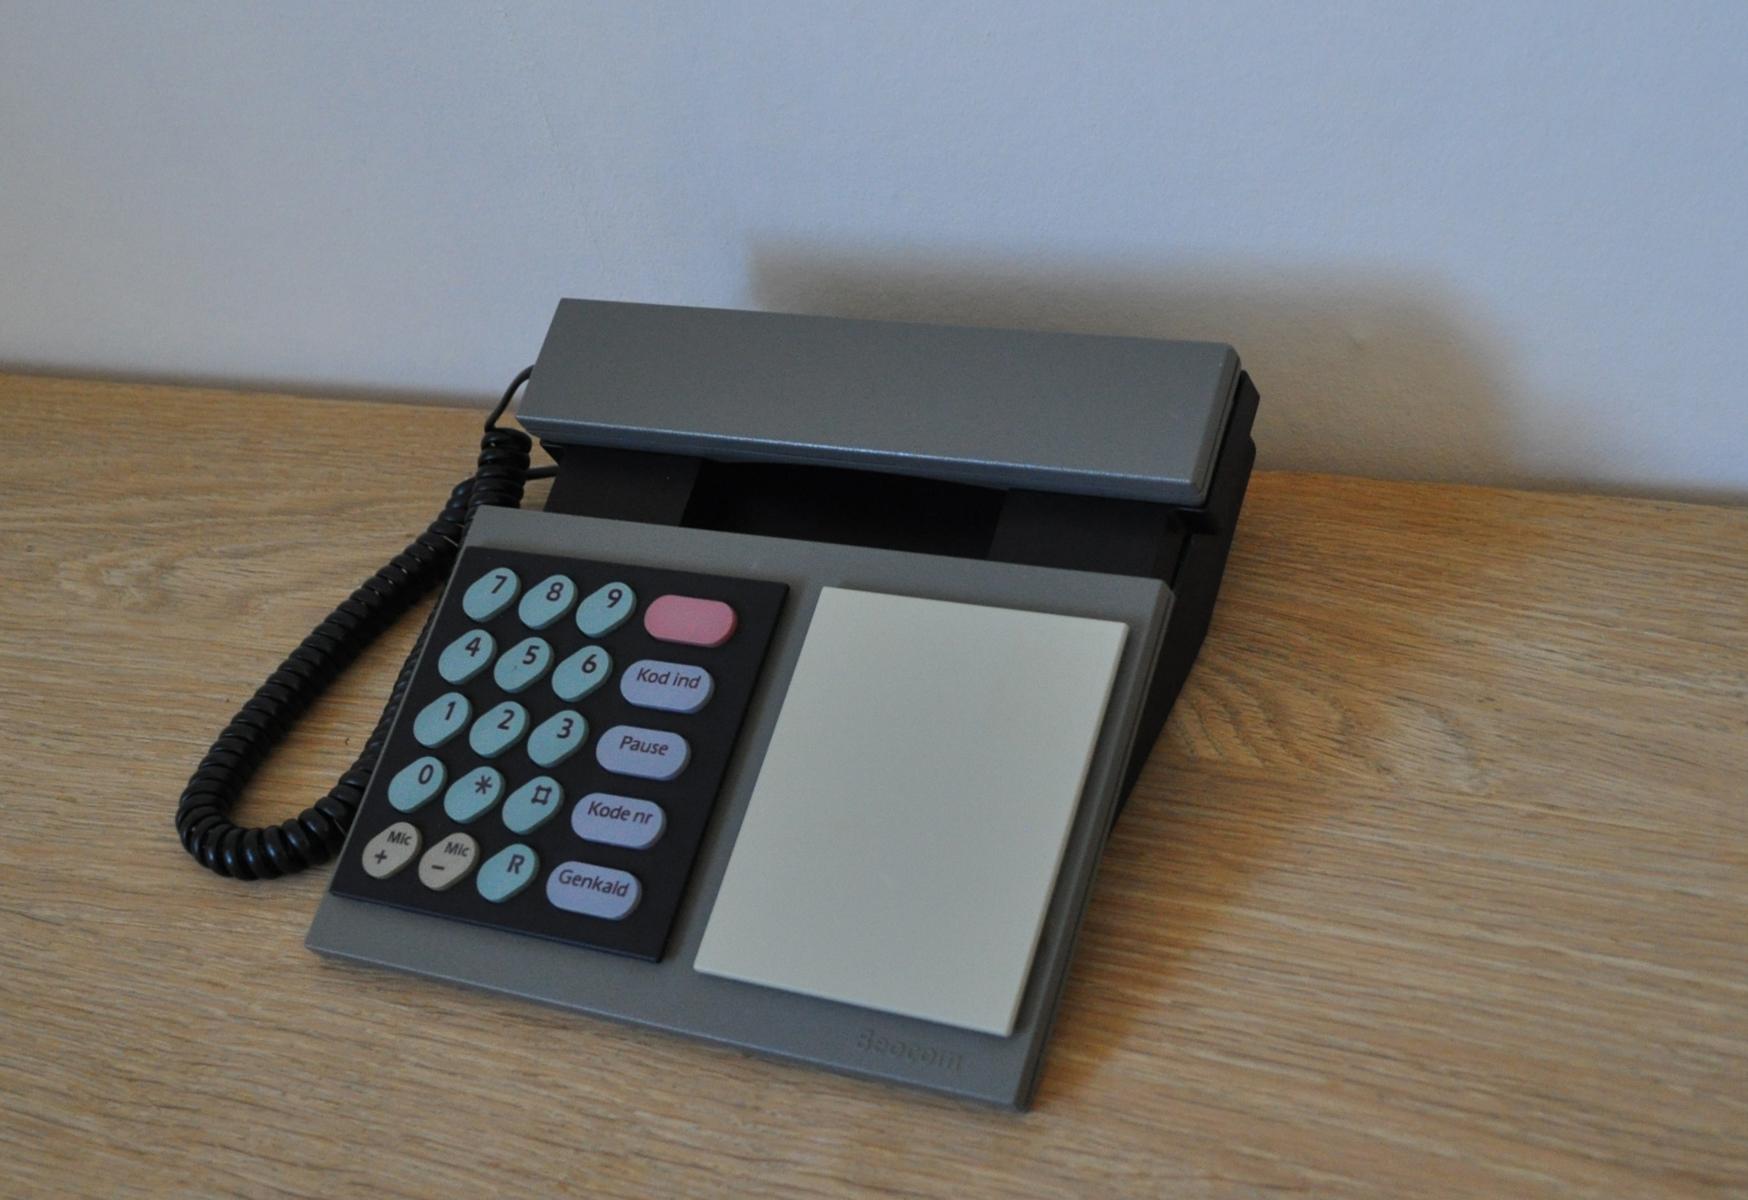 Beocom 1000 telephone from 1986 by Bang & Olusfen.
Fully functional.

History: 